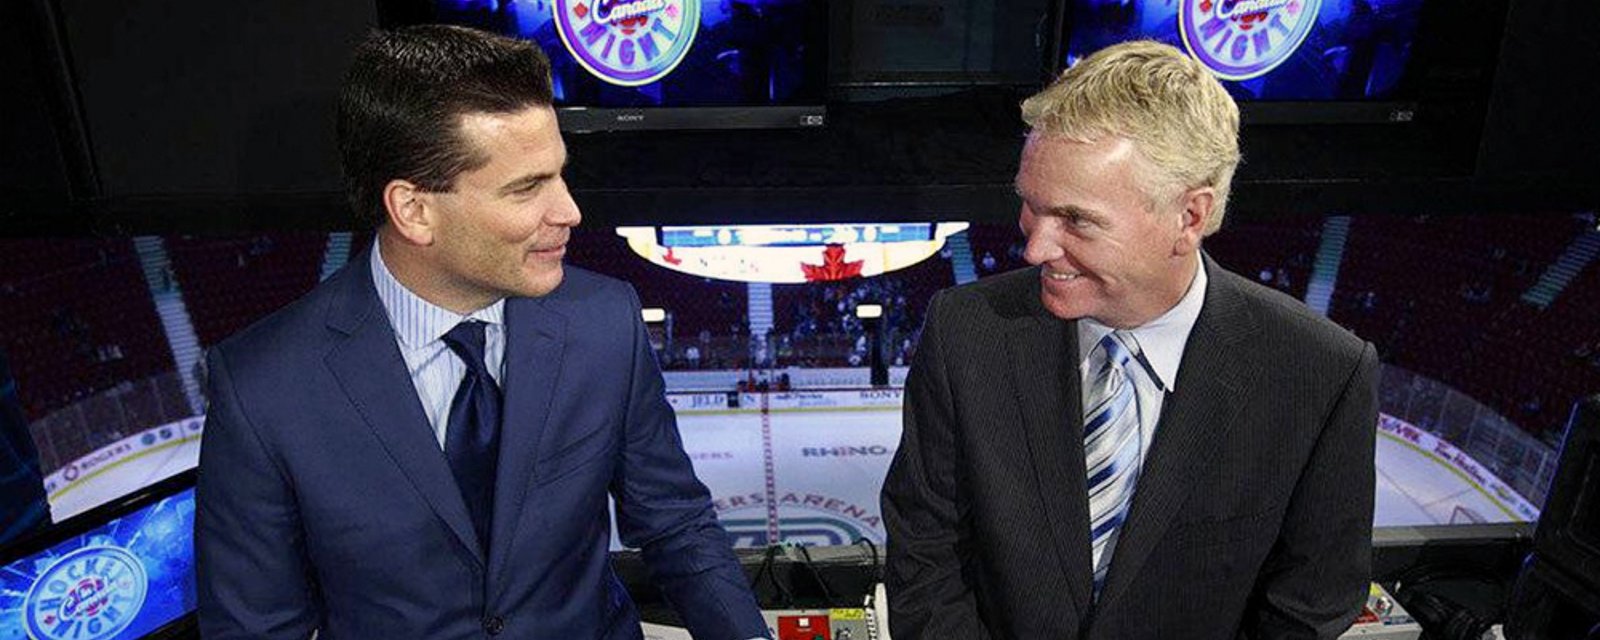 Sportsnet unveils broadcasting team for Stanley Cup Playoffs